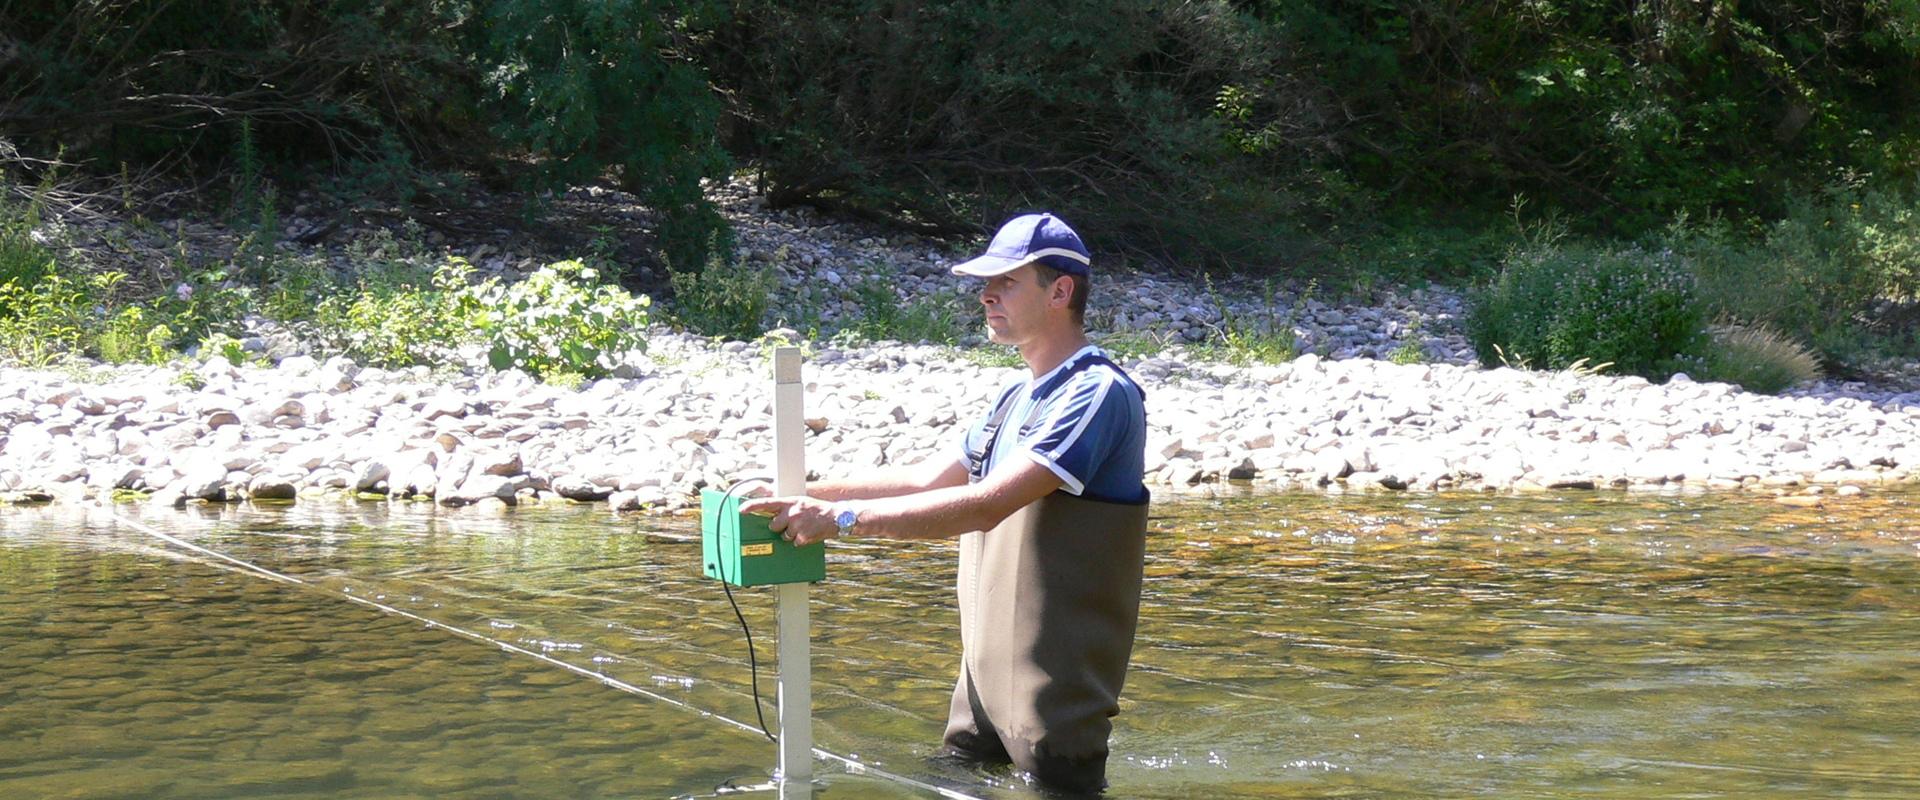 River flow measurement with a micro-current meter, Hérault